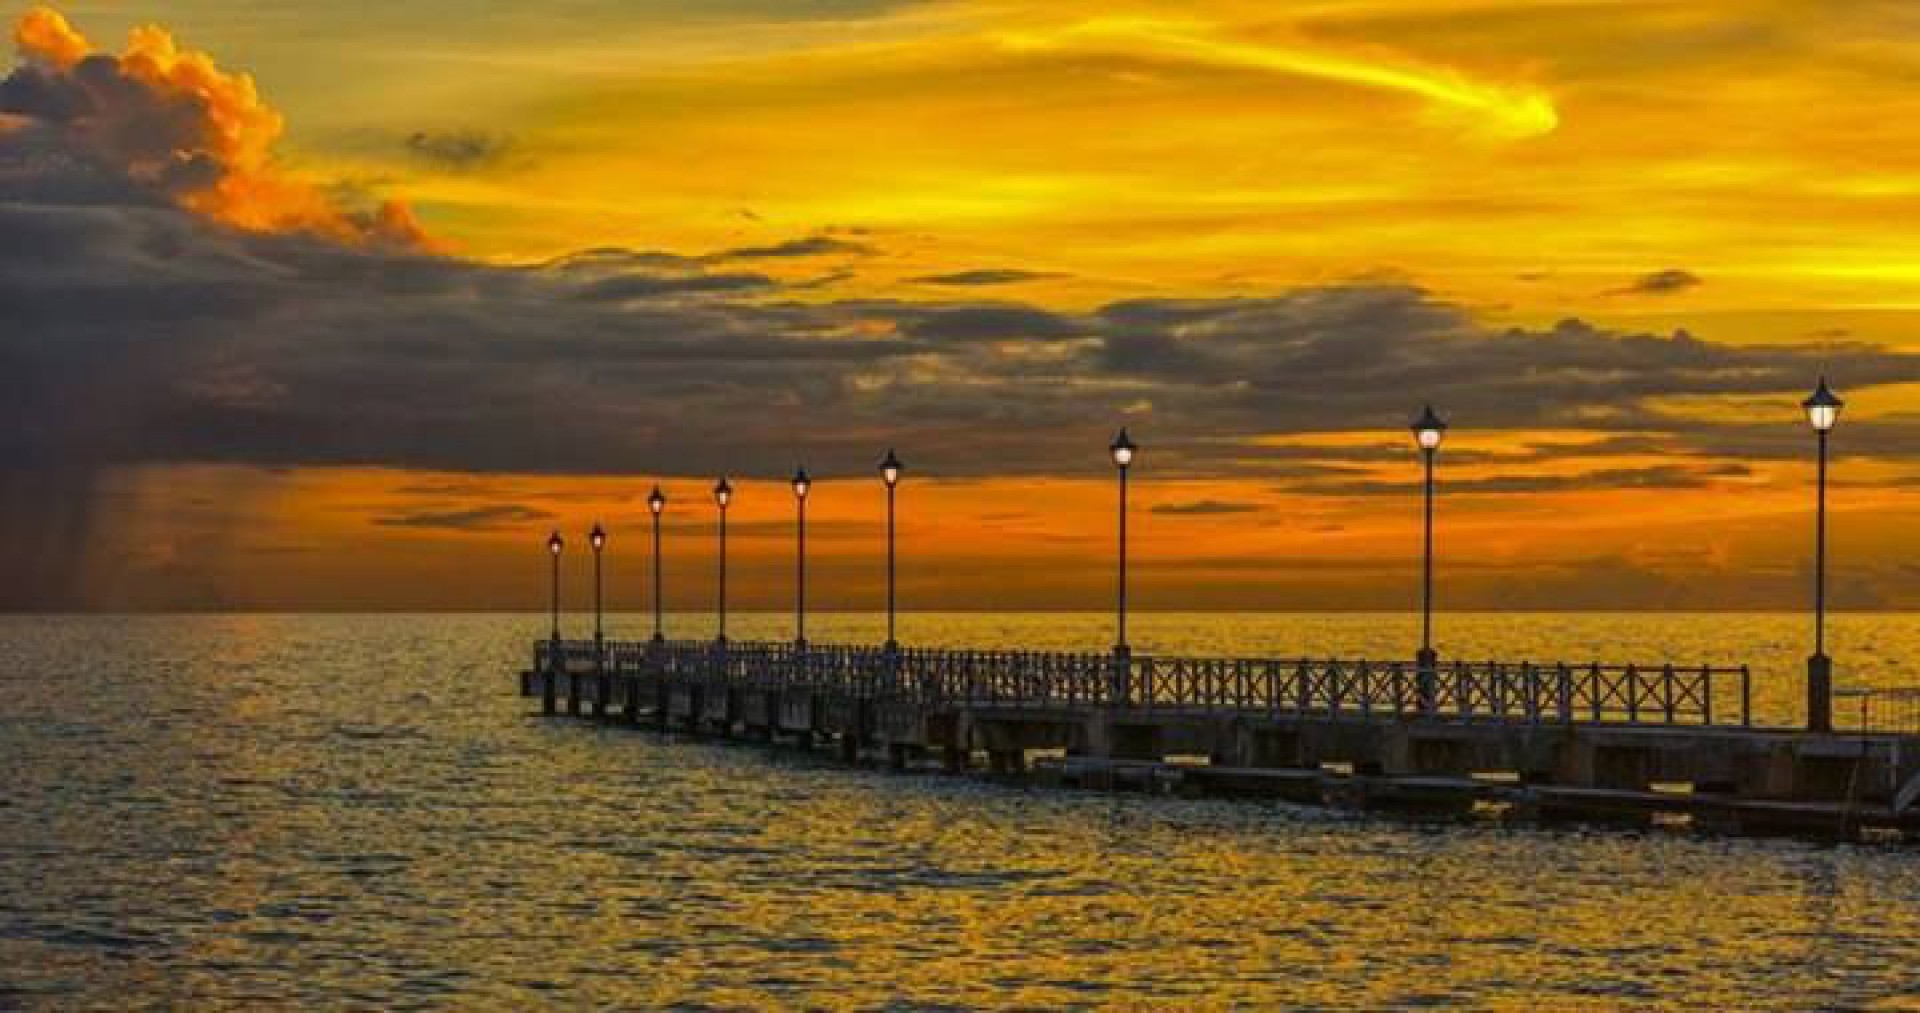 Speightstown Jetty, St. Peter, Barbados